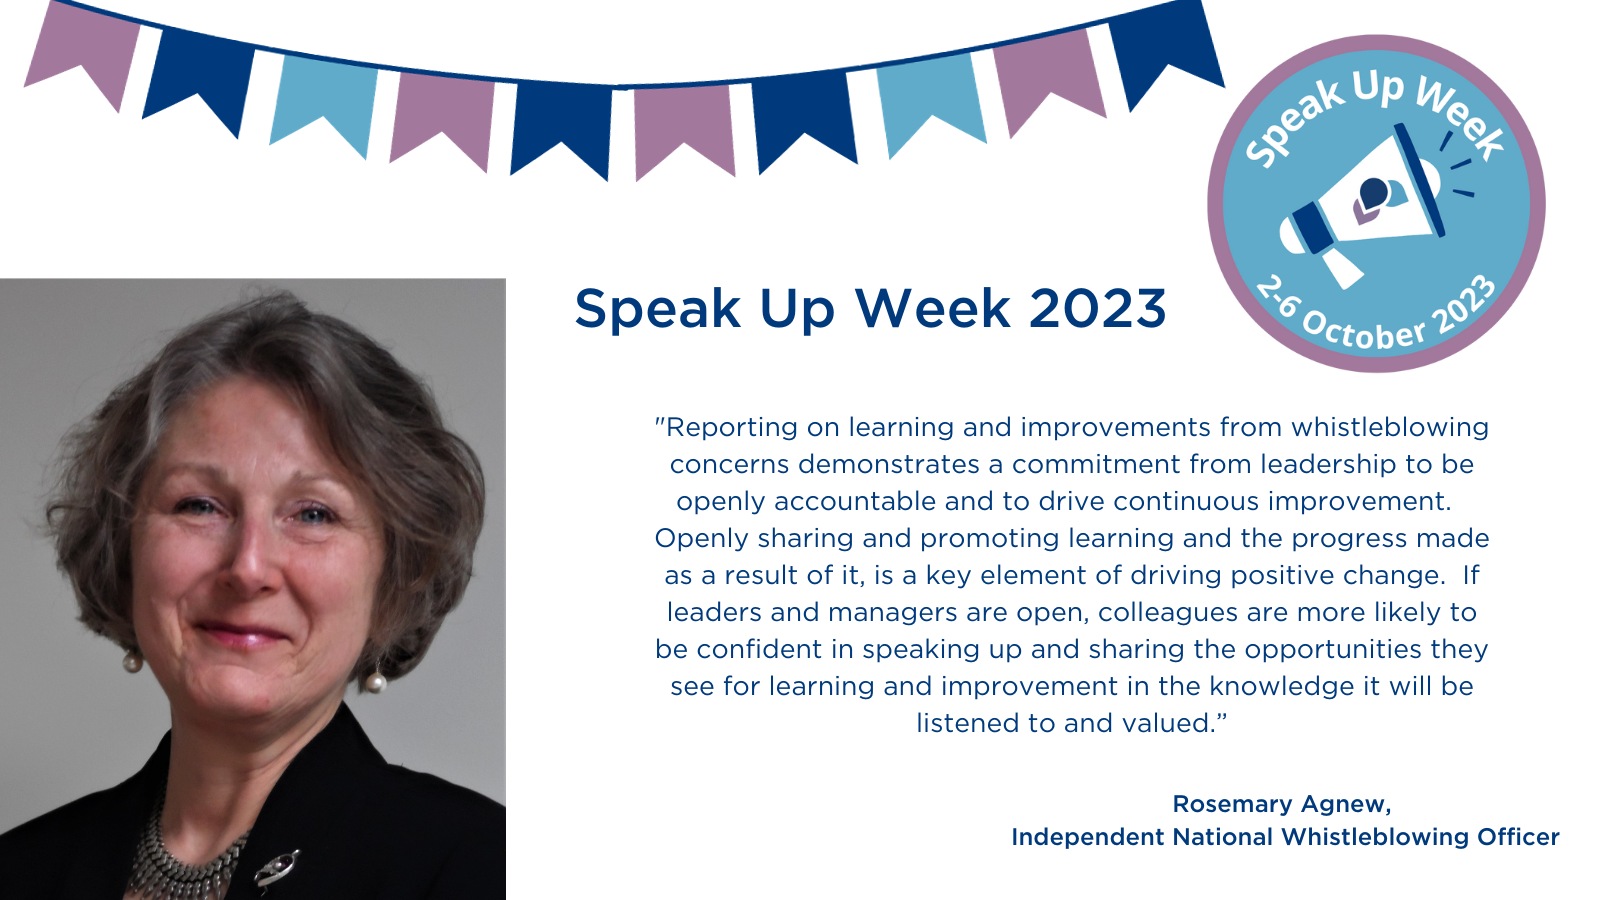 "Reporting on learning and improvements from whistleblowing concerns demonstrates a commitment from leadership to be openly accountable and to drive continuous improvement.  Openly sharing and promoting learning and the progress made as a result of it, is a key element of driving positive change.  If leaders and managers are open, colleagues are more likely to be confident in speaking up and sharing the opportunities they see for learning and improvement in the knowledge it will be listened to and valued."